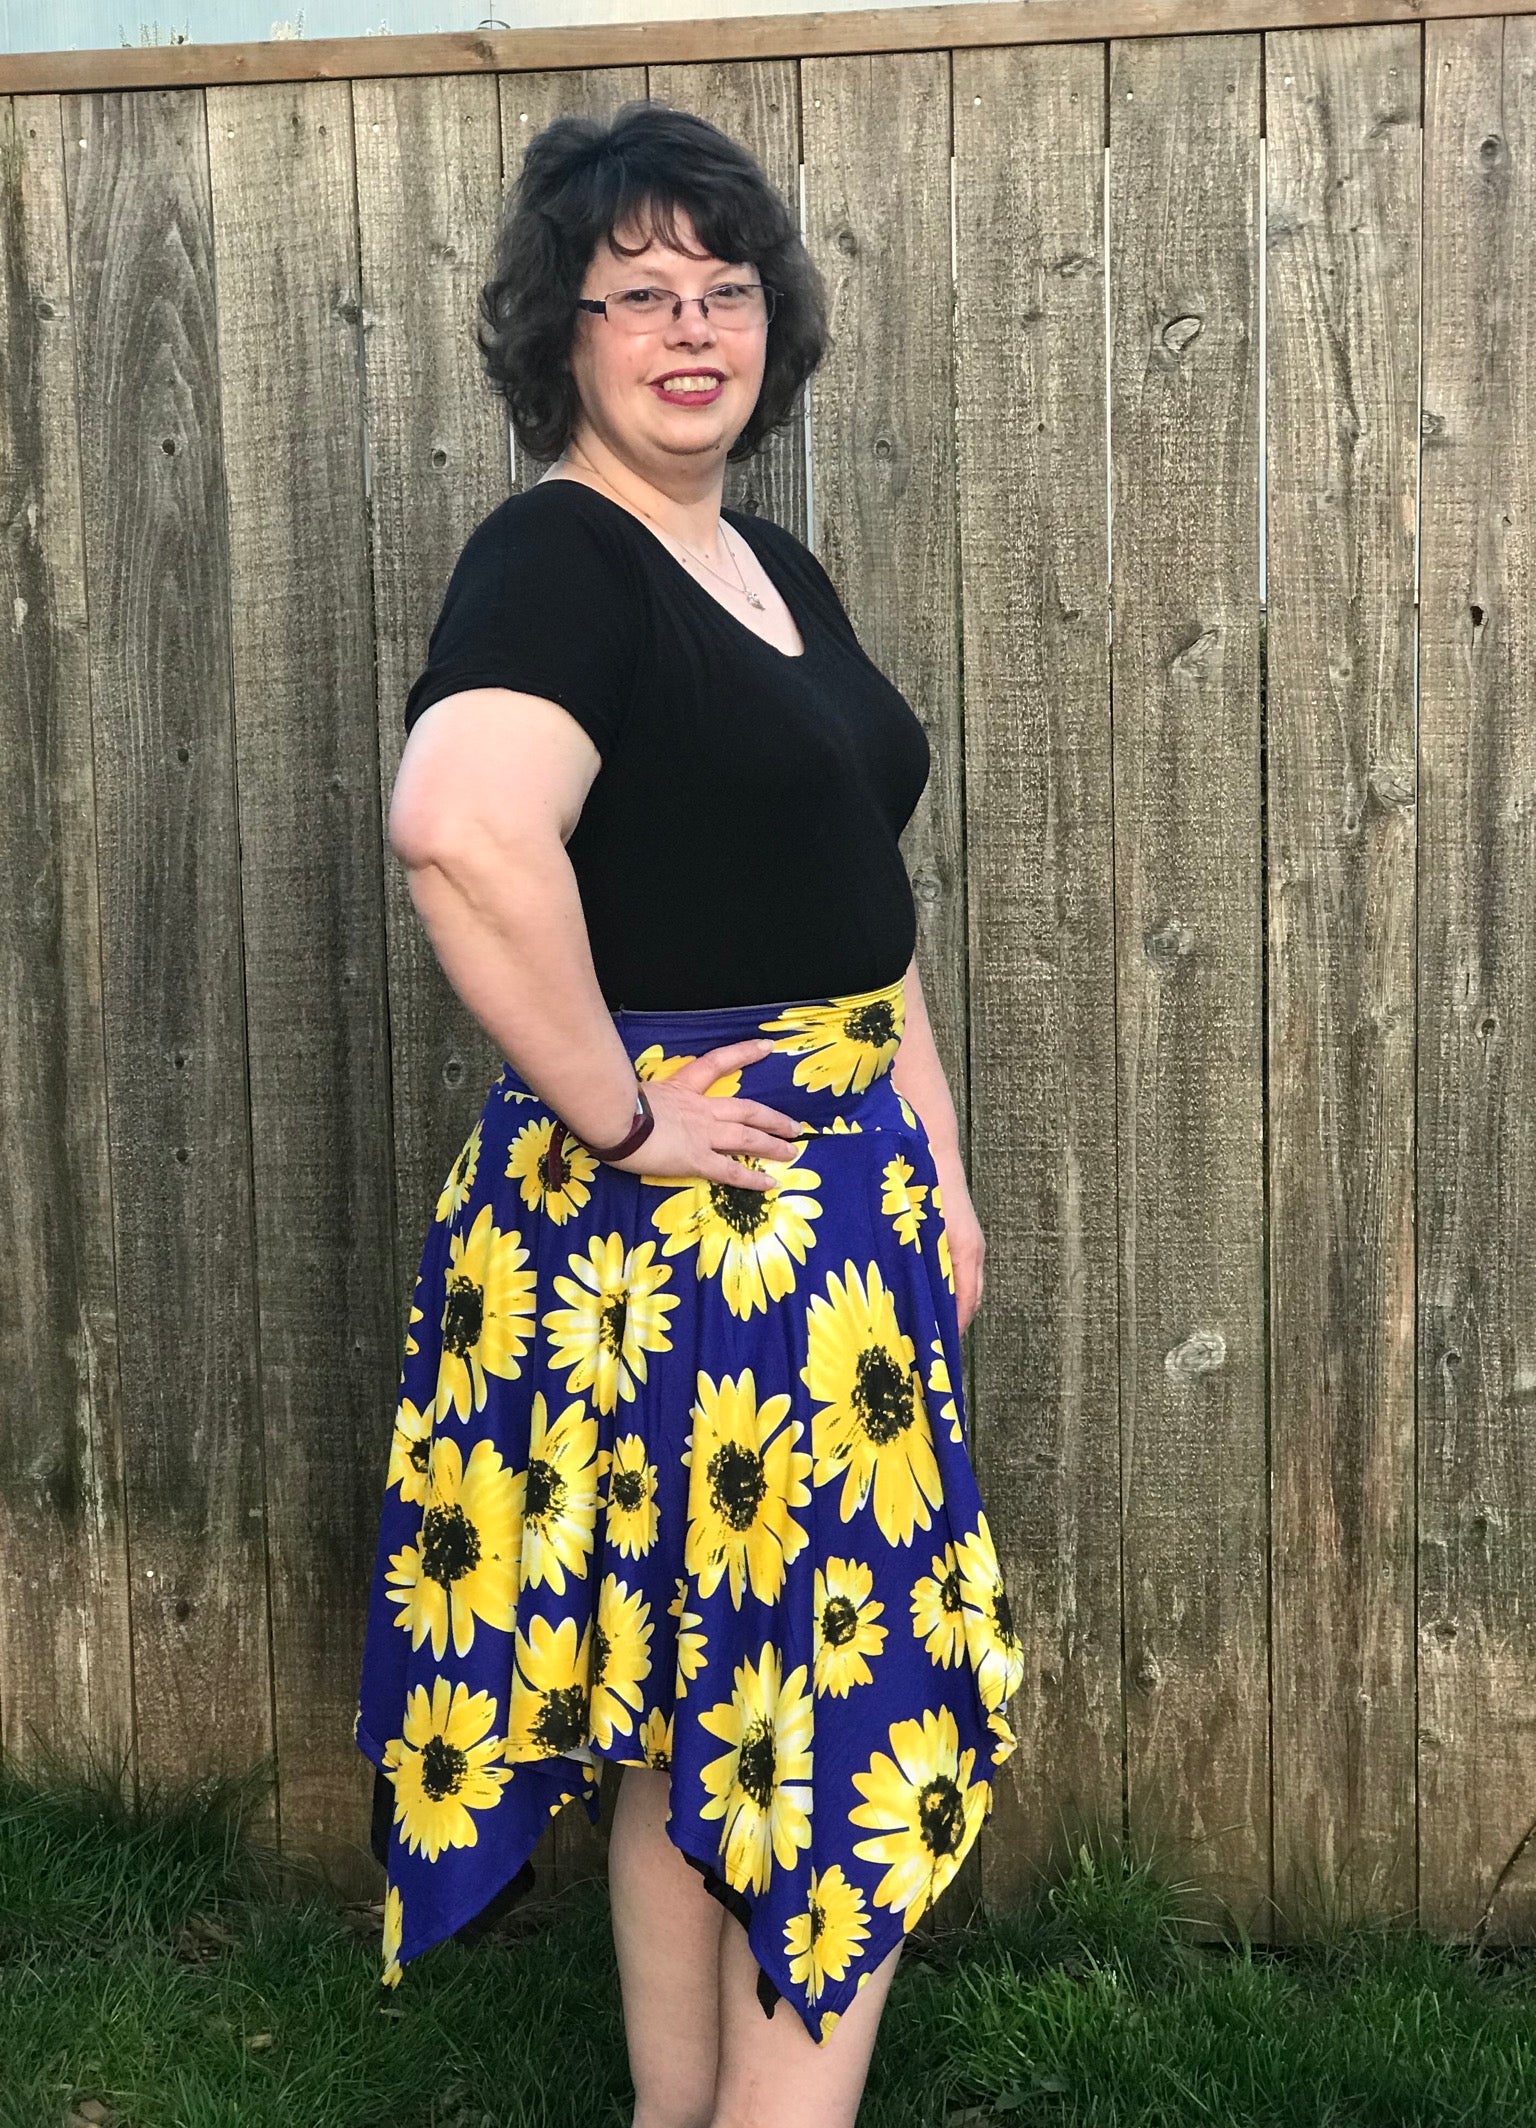 Jersey Skirt Pattern (adult) - Clearance Sale